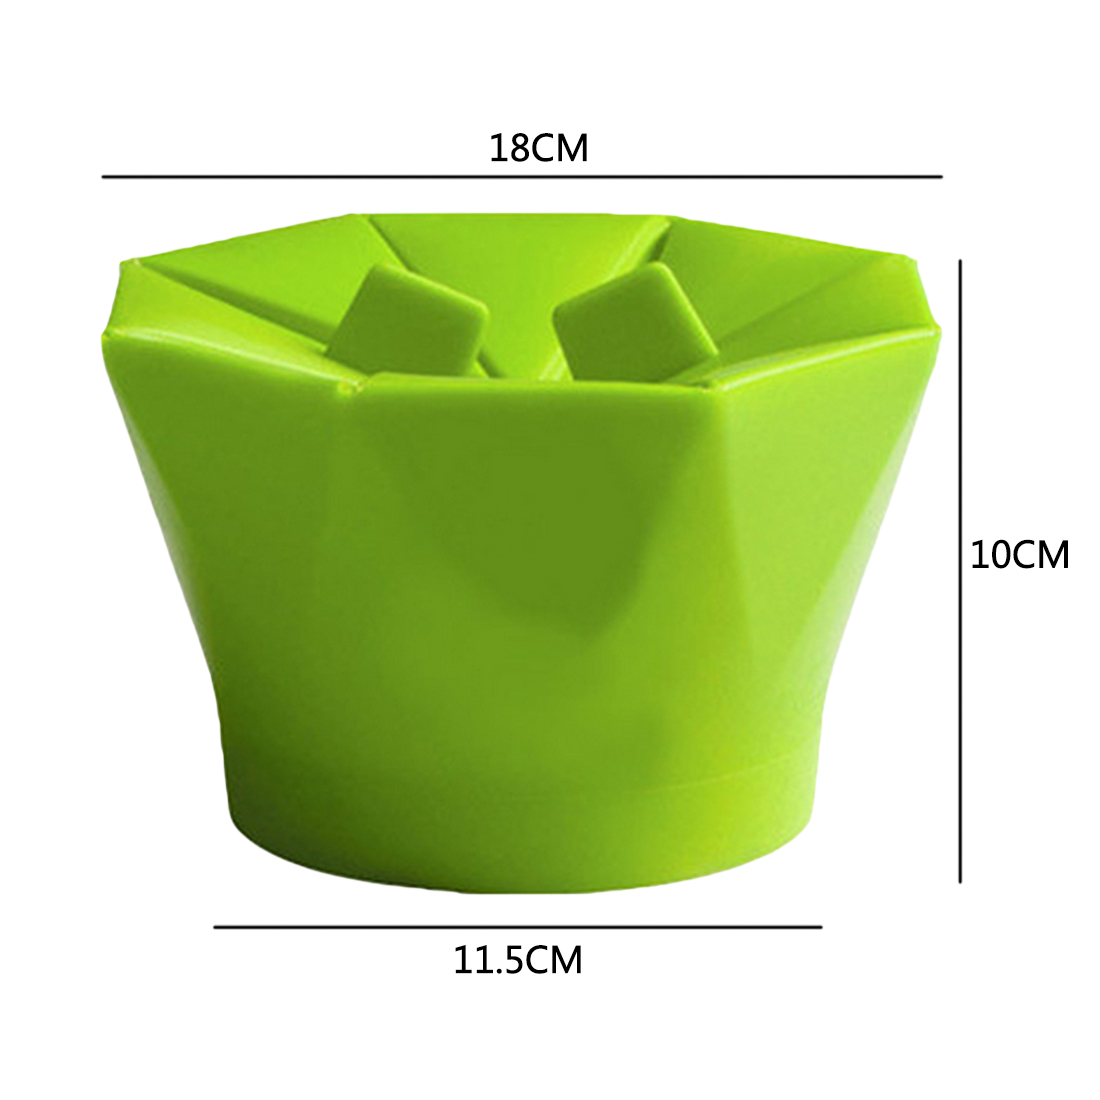 1pcs Popcorn Maker DIY Silicone Microwave Popcorn Maker Fold Bucket Kitchen Cooking Tool Accessories Red Green